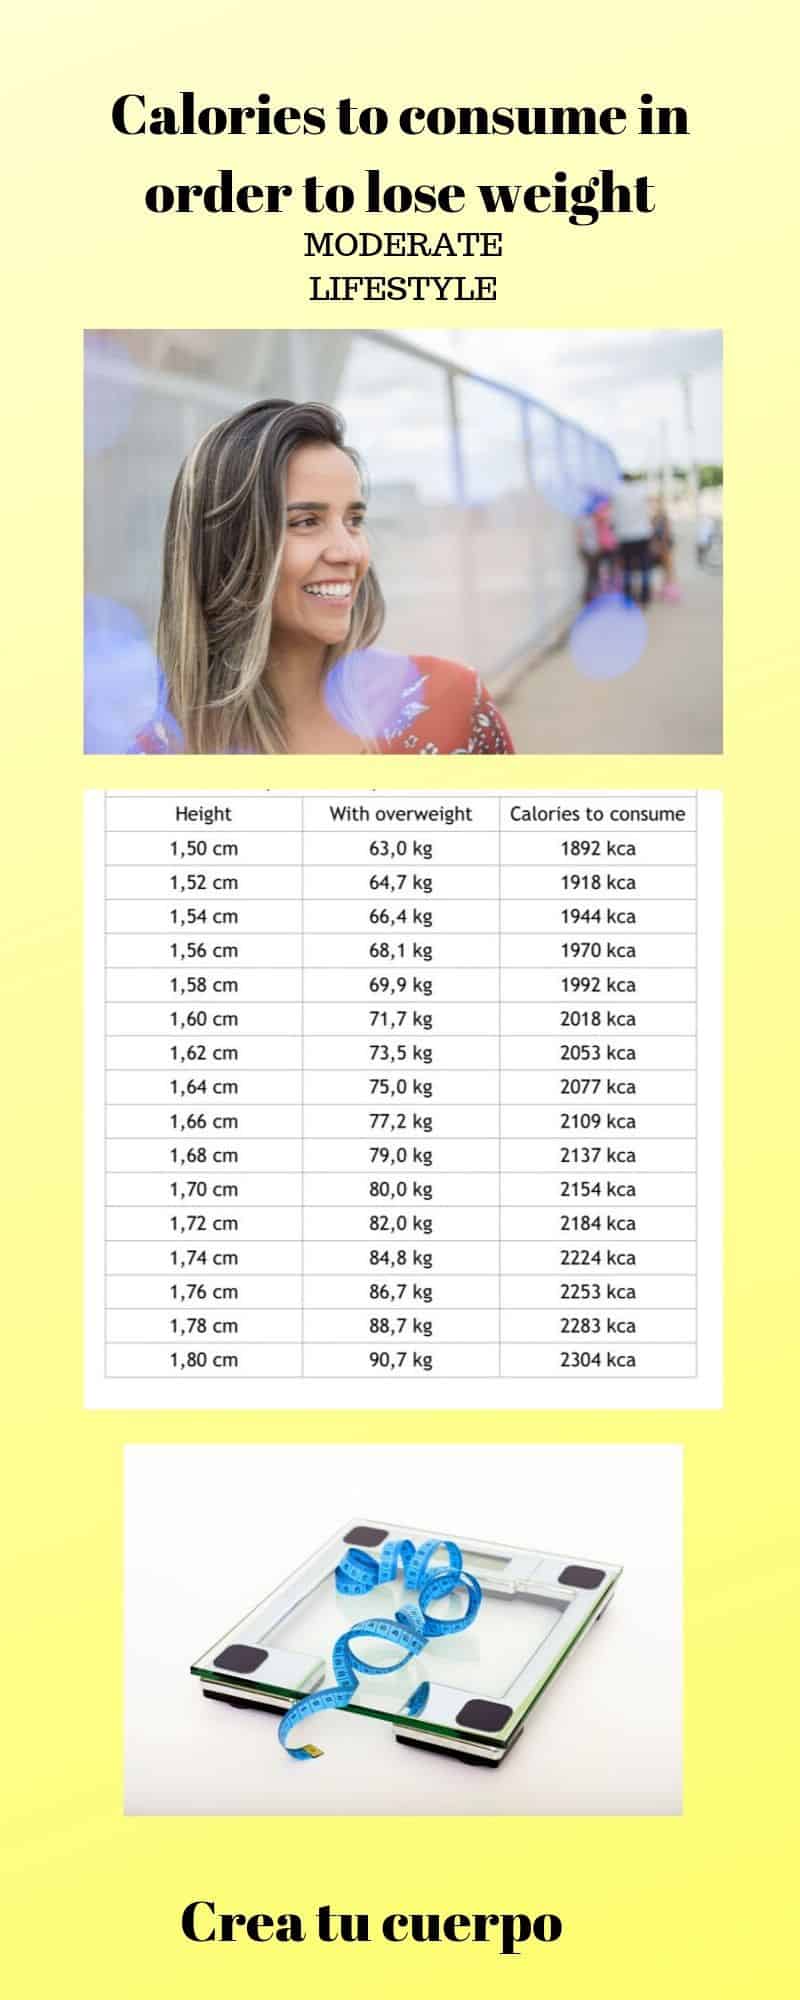 Calories to eat in order to lose Weight if you have a moderate lifestyle